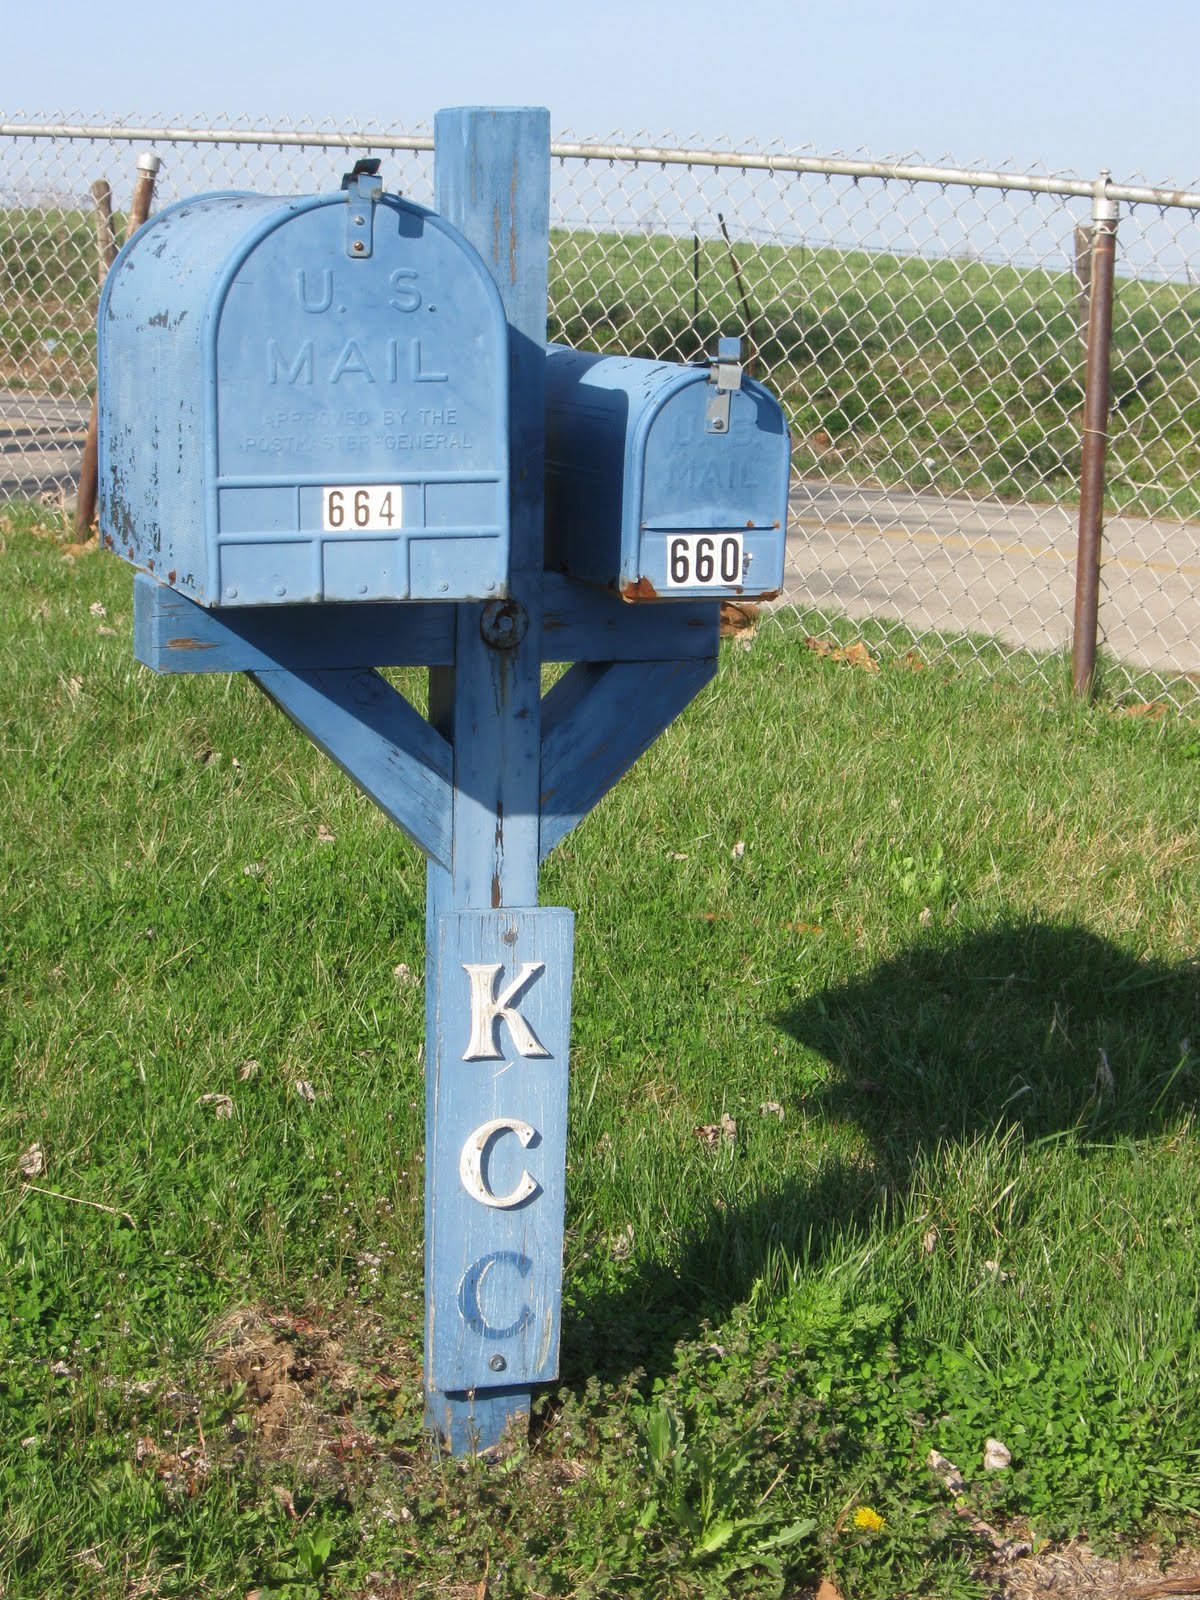 FOLKWAYS NOTEBOOK: RFD AND RURAL MAILBOXES